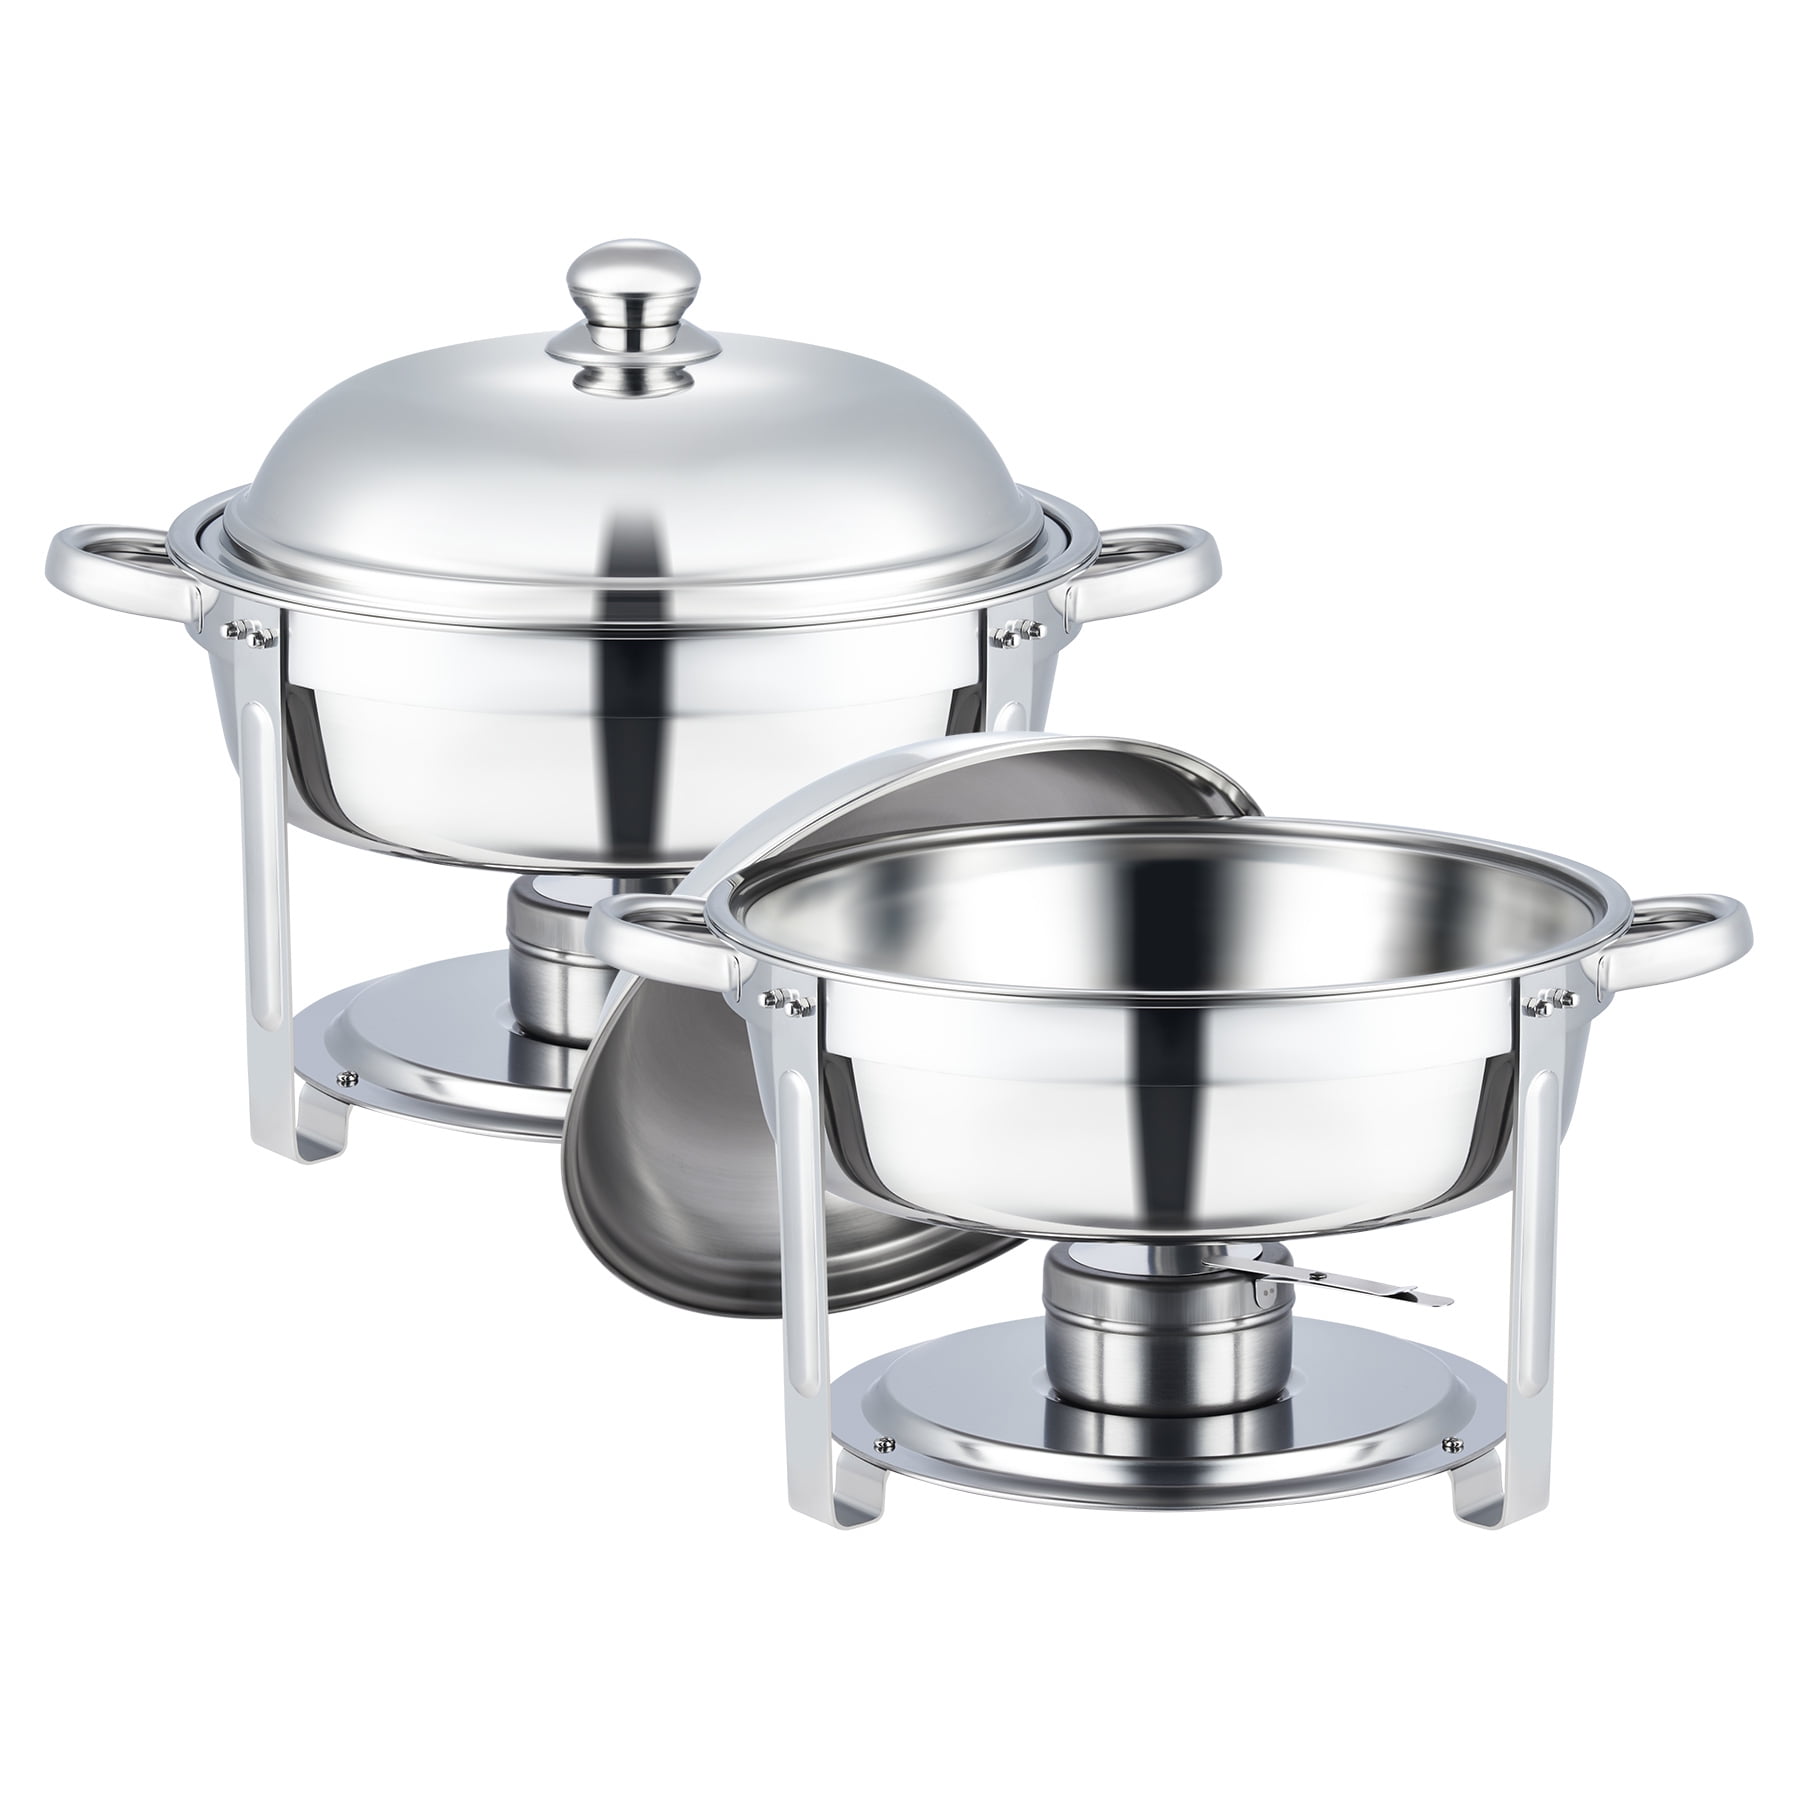 5 Quart 2 Pack Chafing Dish Set Stainless Steel Buffet Chafers for ...